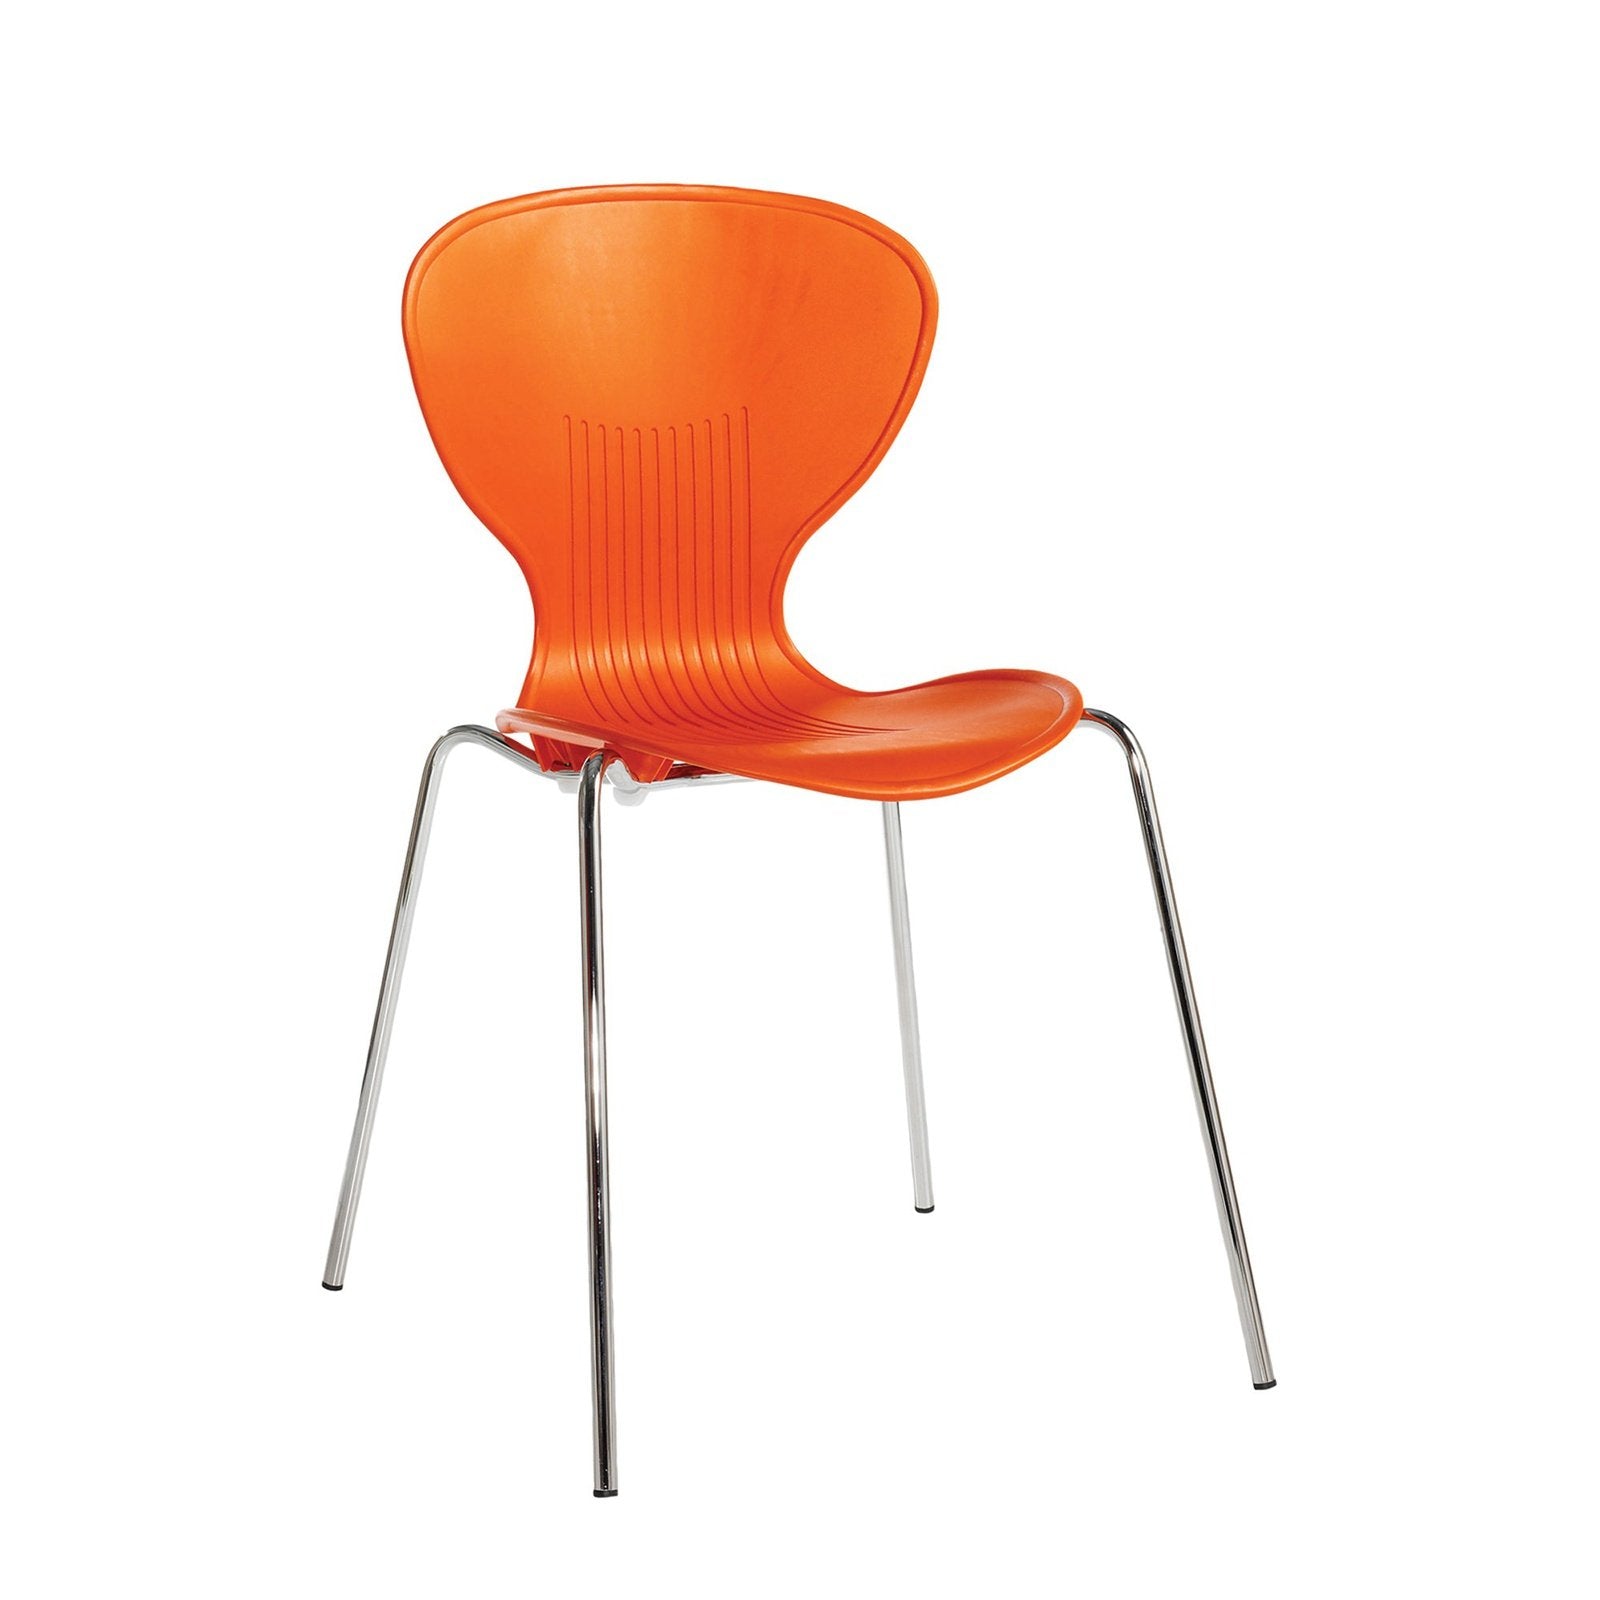 Sienna one piece shell chair with chrome legs - Office Products Online